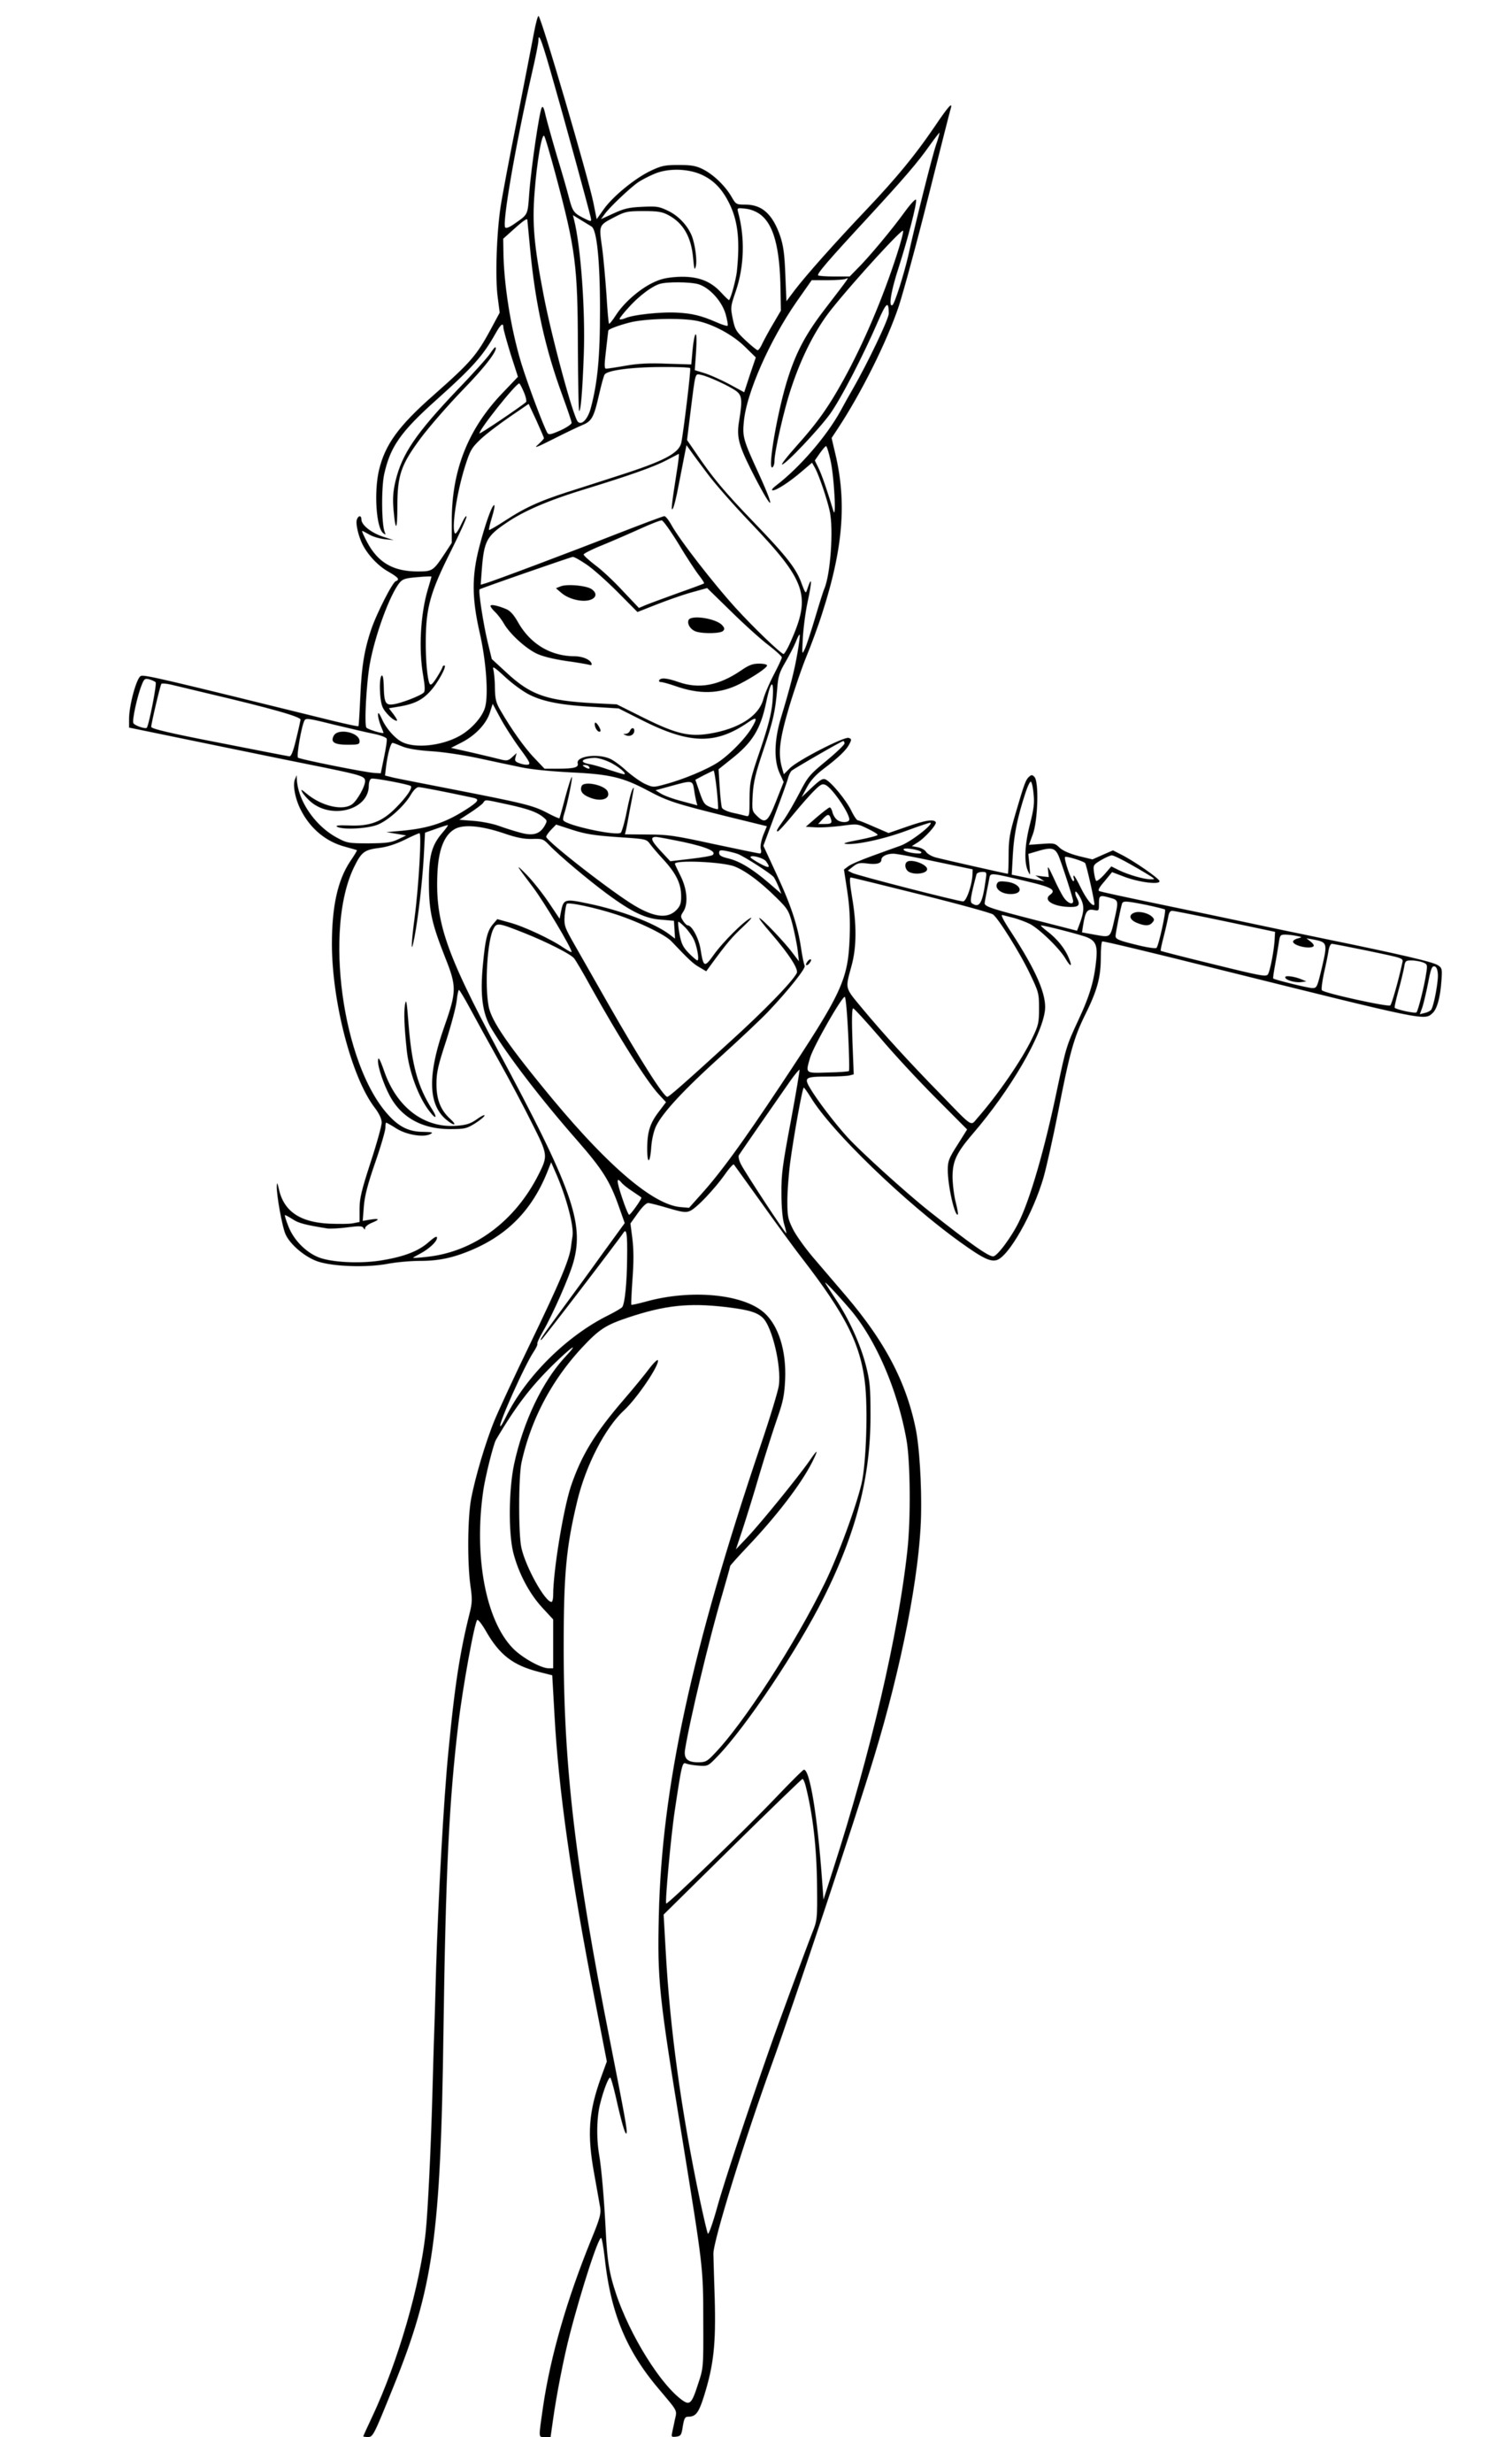 Rena Rouge Playing On Flutes Coloring Page